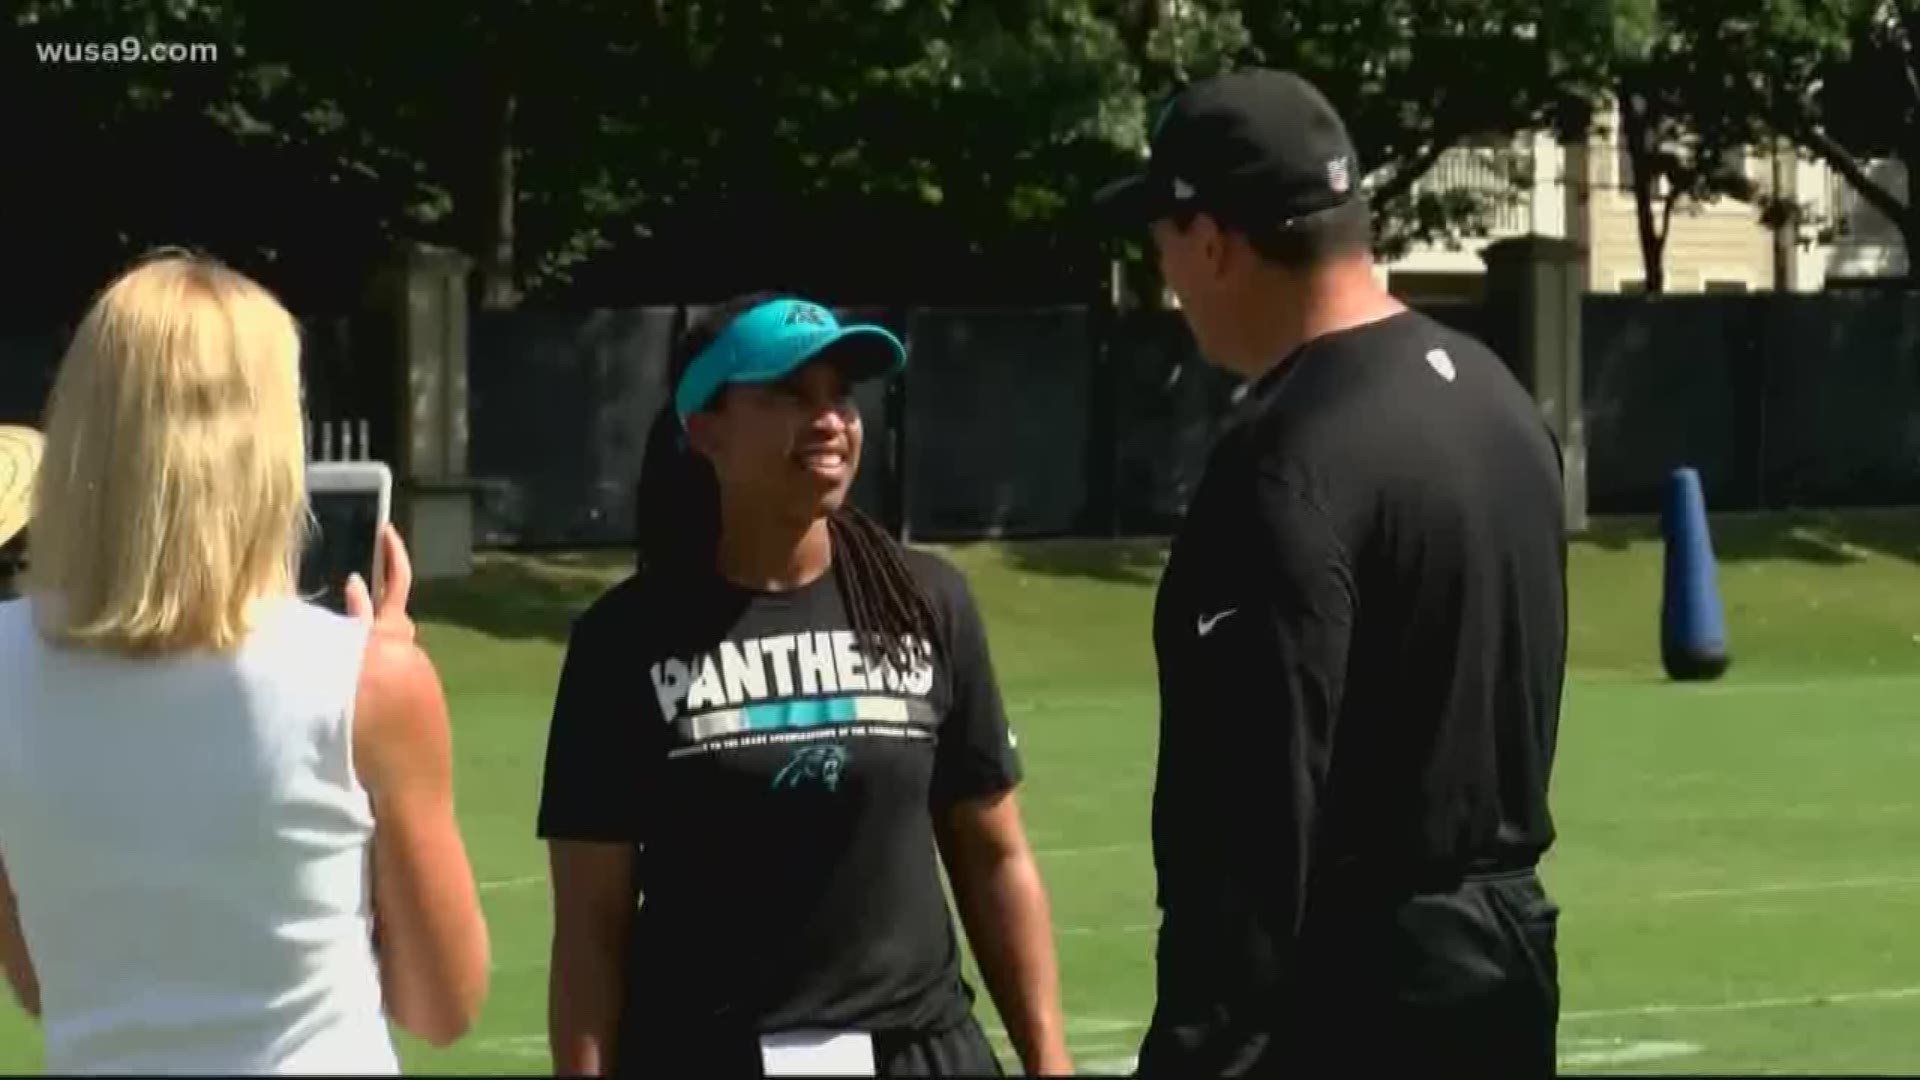 Redskins head coach Ron Rivera announced Jennifer King to his full-time coaching staff, making history. She joins a small but growing group of female coaches.